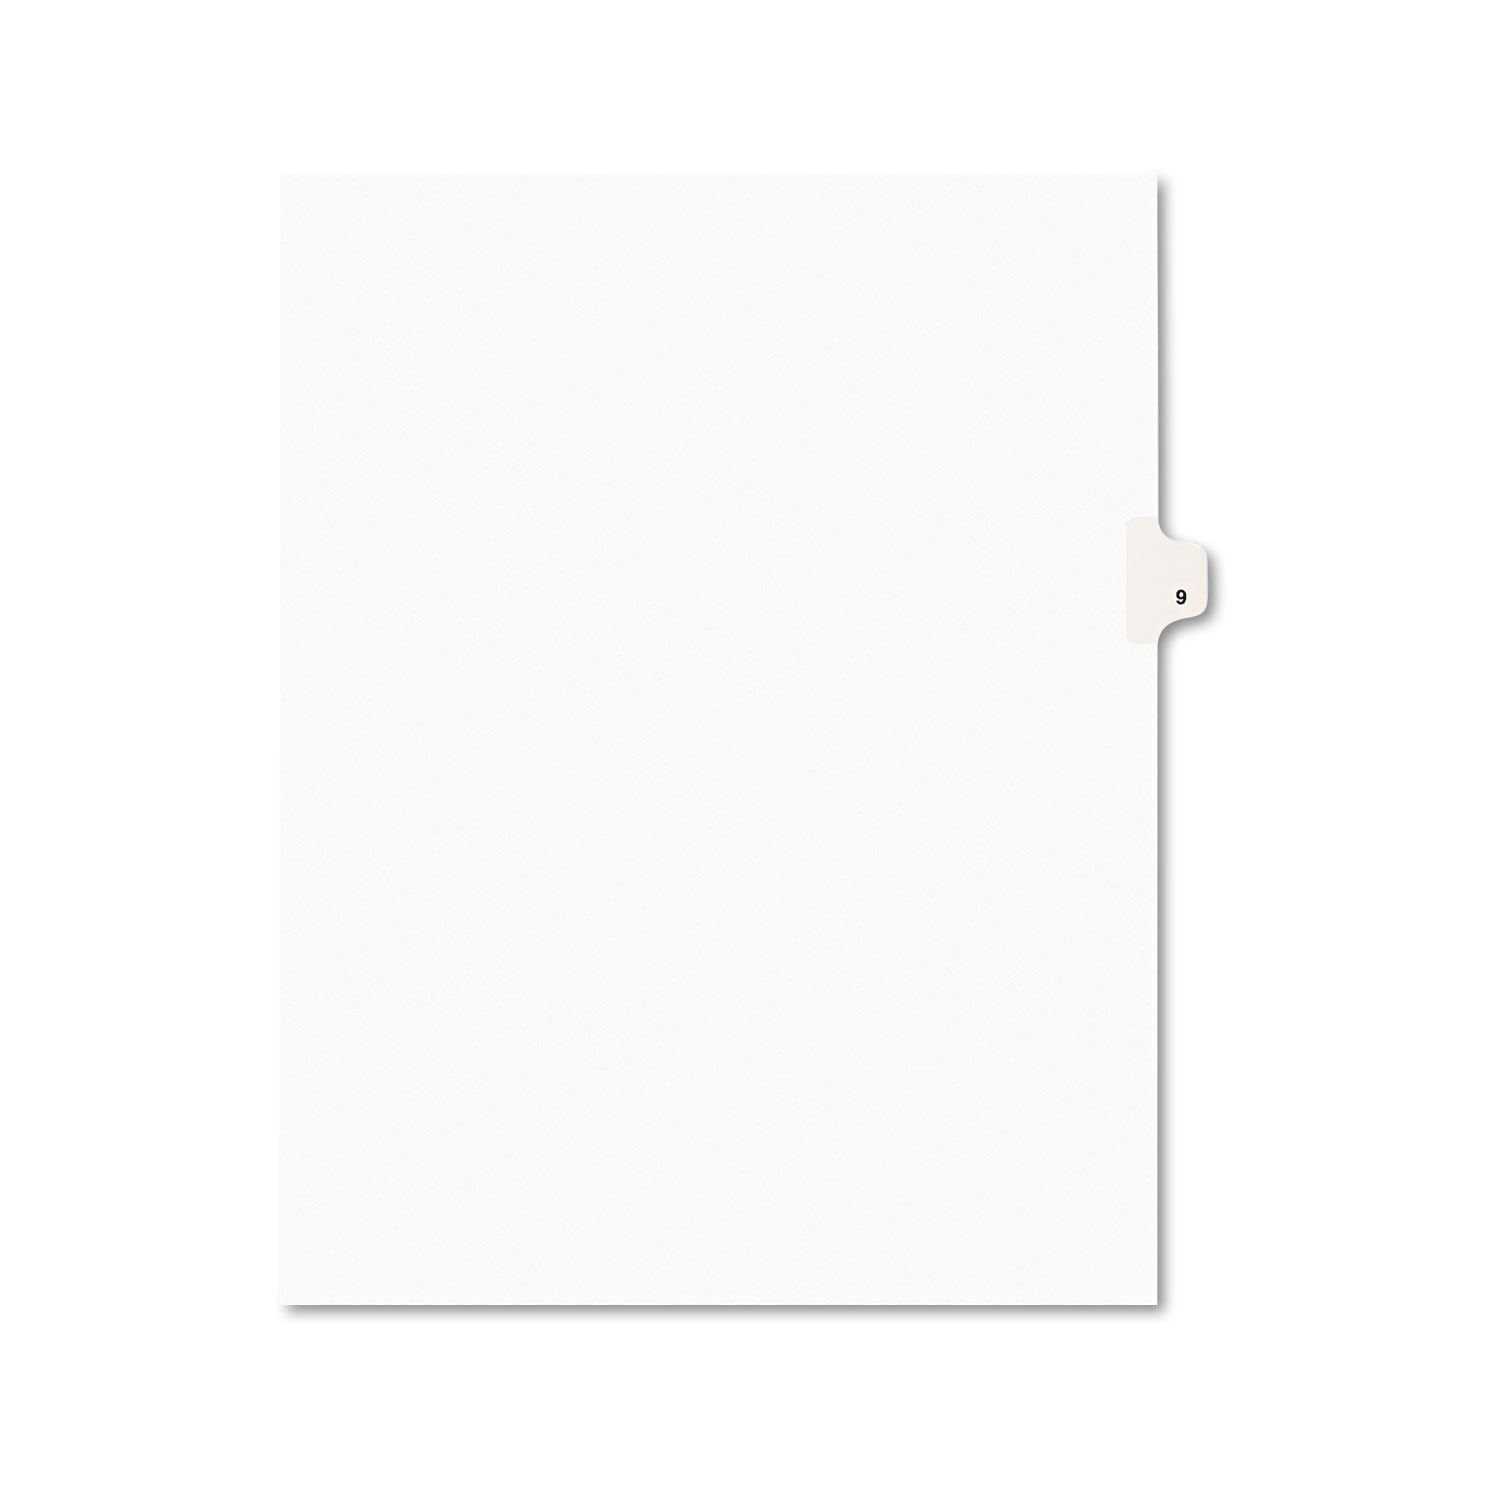  Avery 11919 Preprinted Legal Exhibit Side Tab Index Dividers, Avery Style, 10-Tab, 9, 11 x 8.5, White, 25/Pack (AVE11919) 